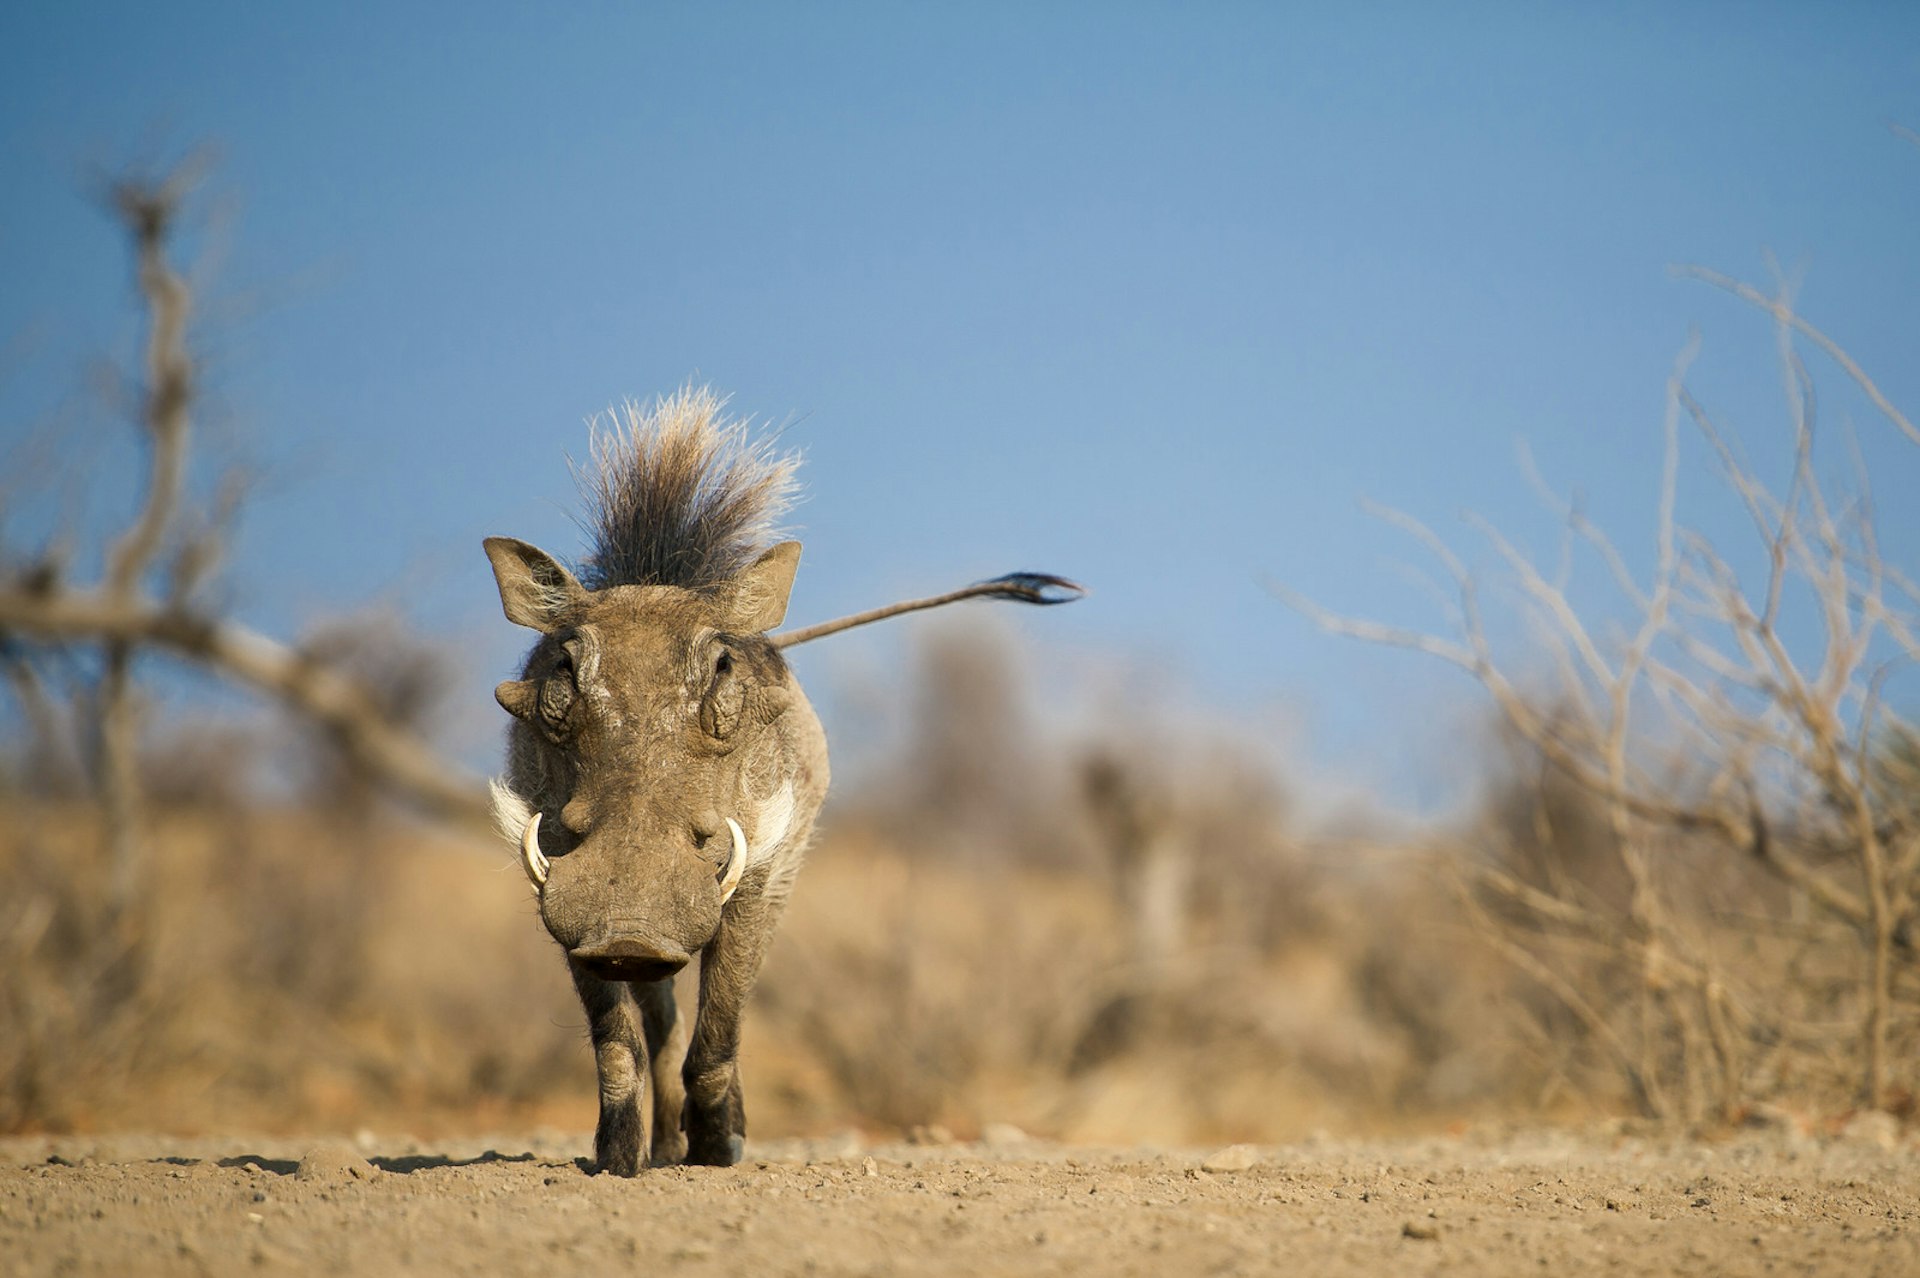 Shot from ground level, a warthog walks towards the camera across brown dirt; the hair on its neck is raised, which makes it look like it has a mohawk